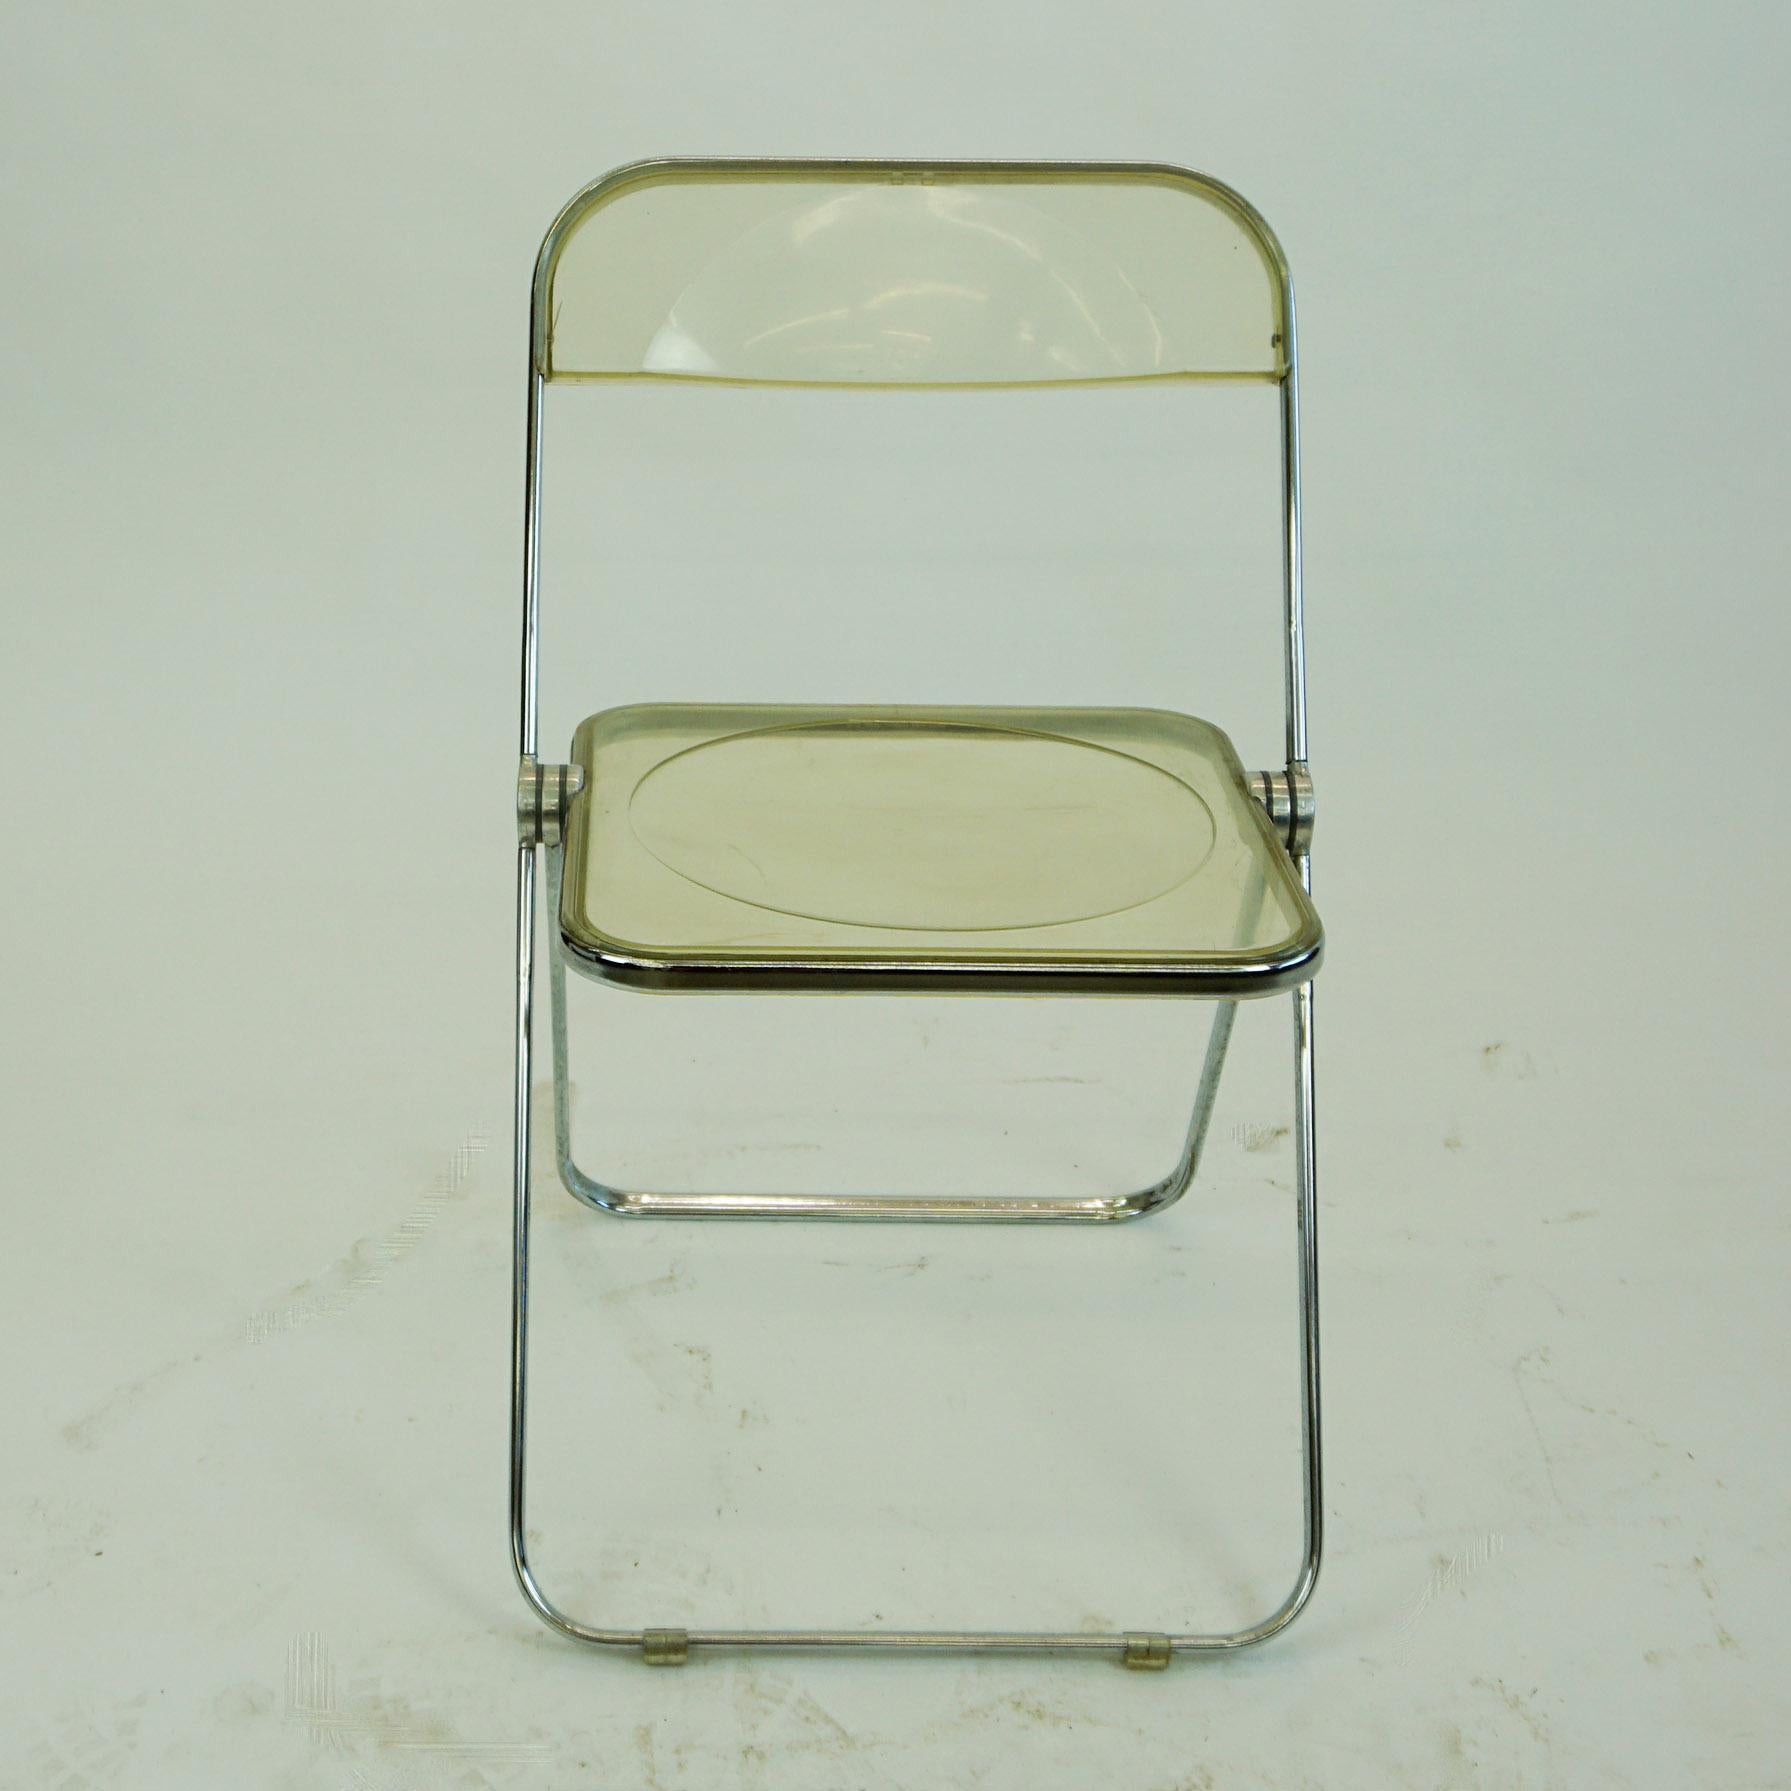 Set of four iconic Italian Mid-Century Modern folding chairs in Lucite and chrome, designed by Giancarlo Piretti 1967 for Anonima Castelli, Italy. The Plia folding chair is a real design Classic as it won several prices and is part of the MoMA